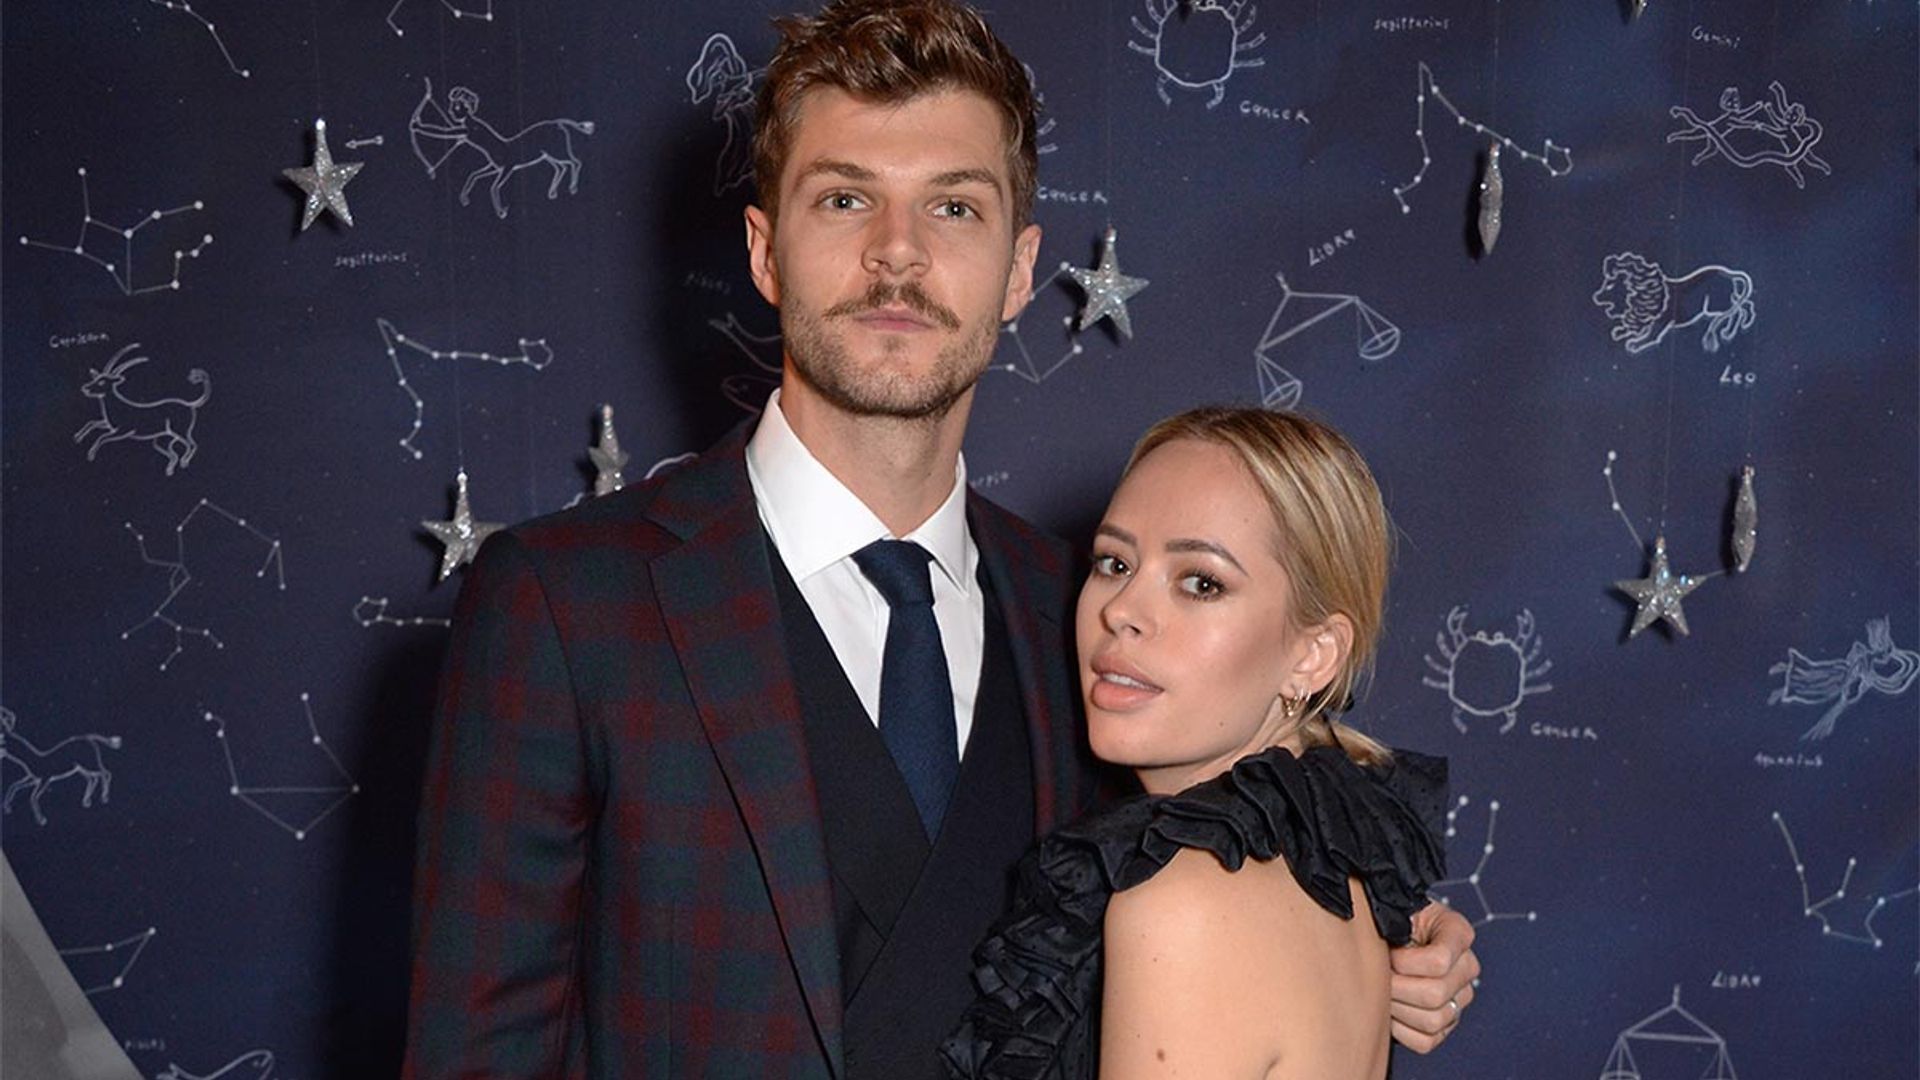 Tanya Burr and Jim Chapman are selling their £2million London home amid split – see inside